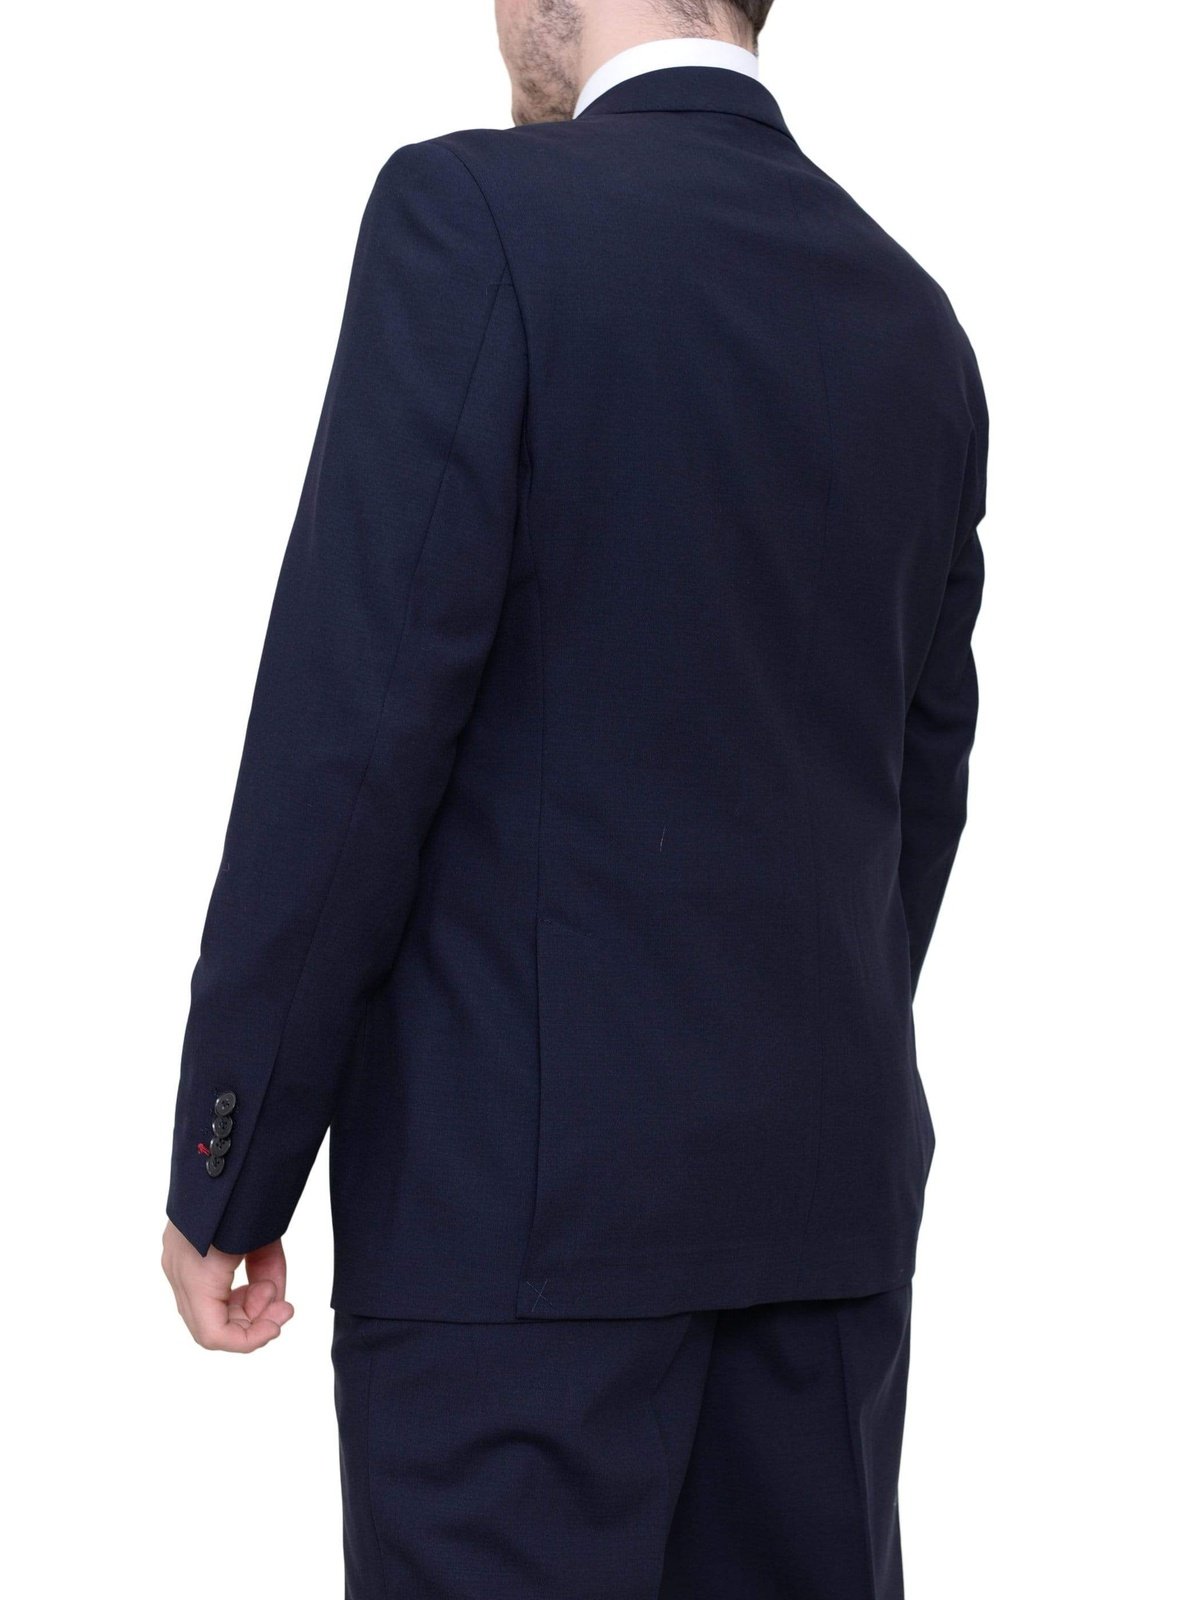 Ideal TWO PIECE SUITS Ideal Slim Fit Solid Navy Blue Two Button Half Lined Wool Blend Suit